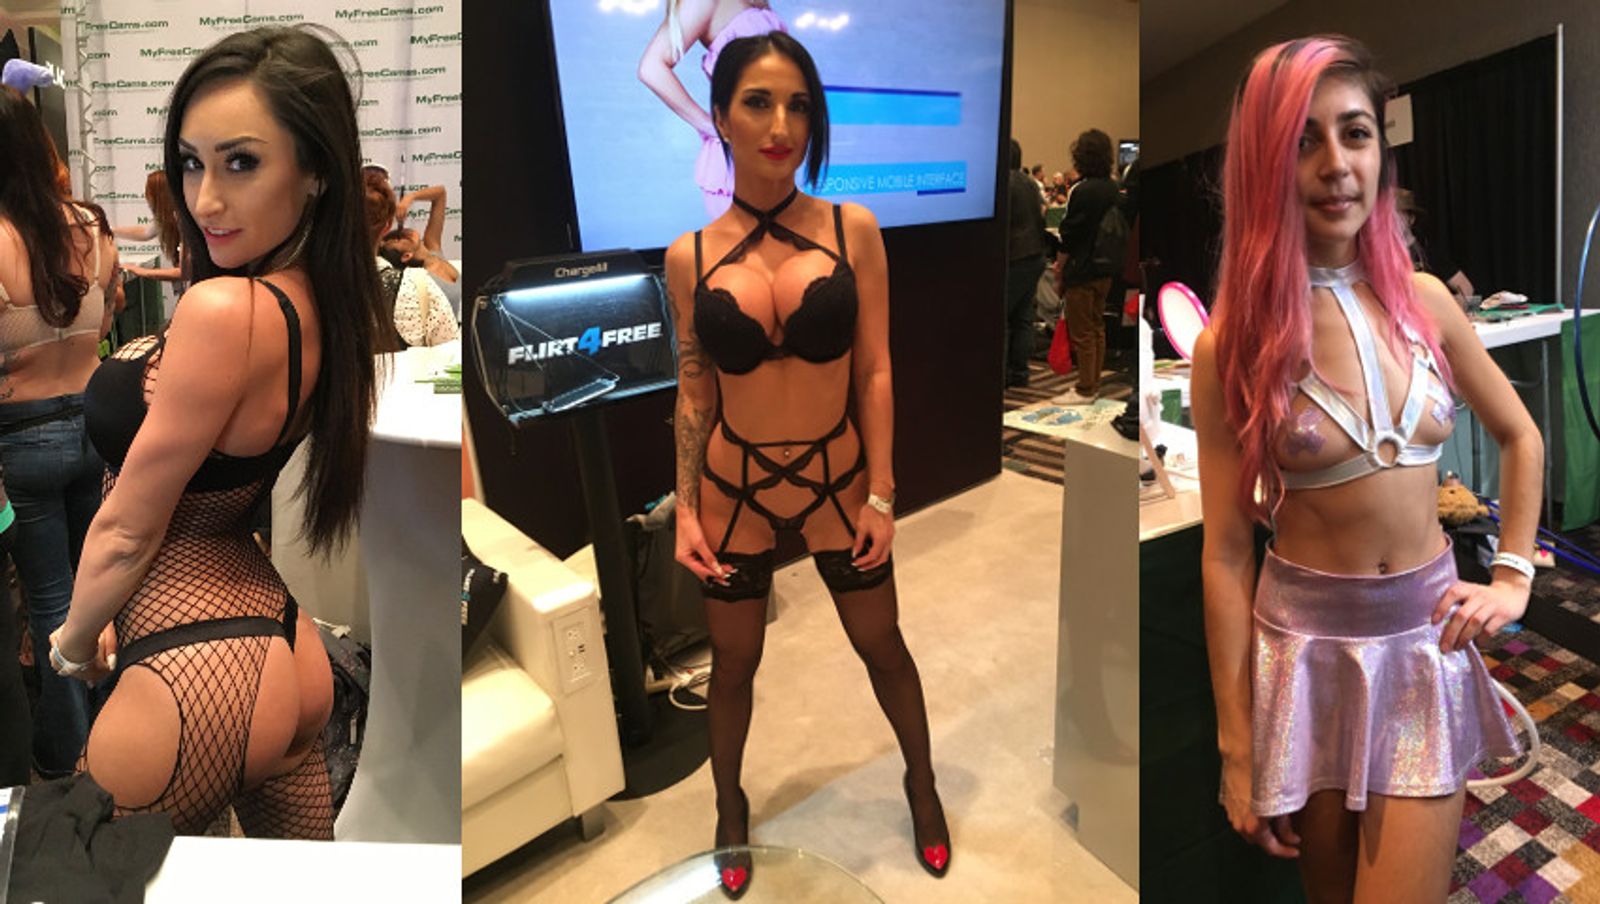 Live-Cam Companies Flex Muscle at 2017 AVN Show